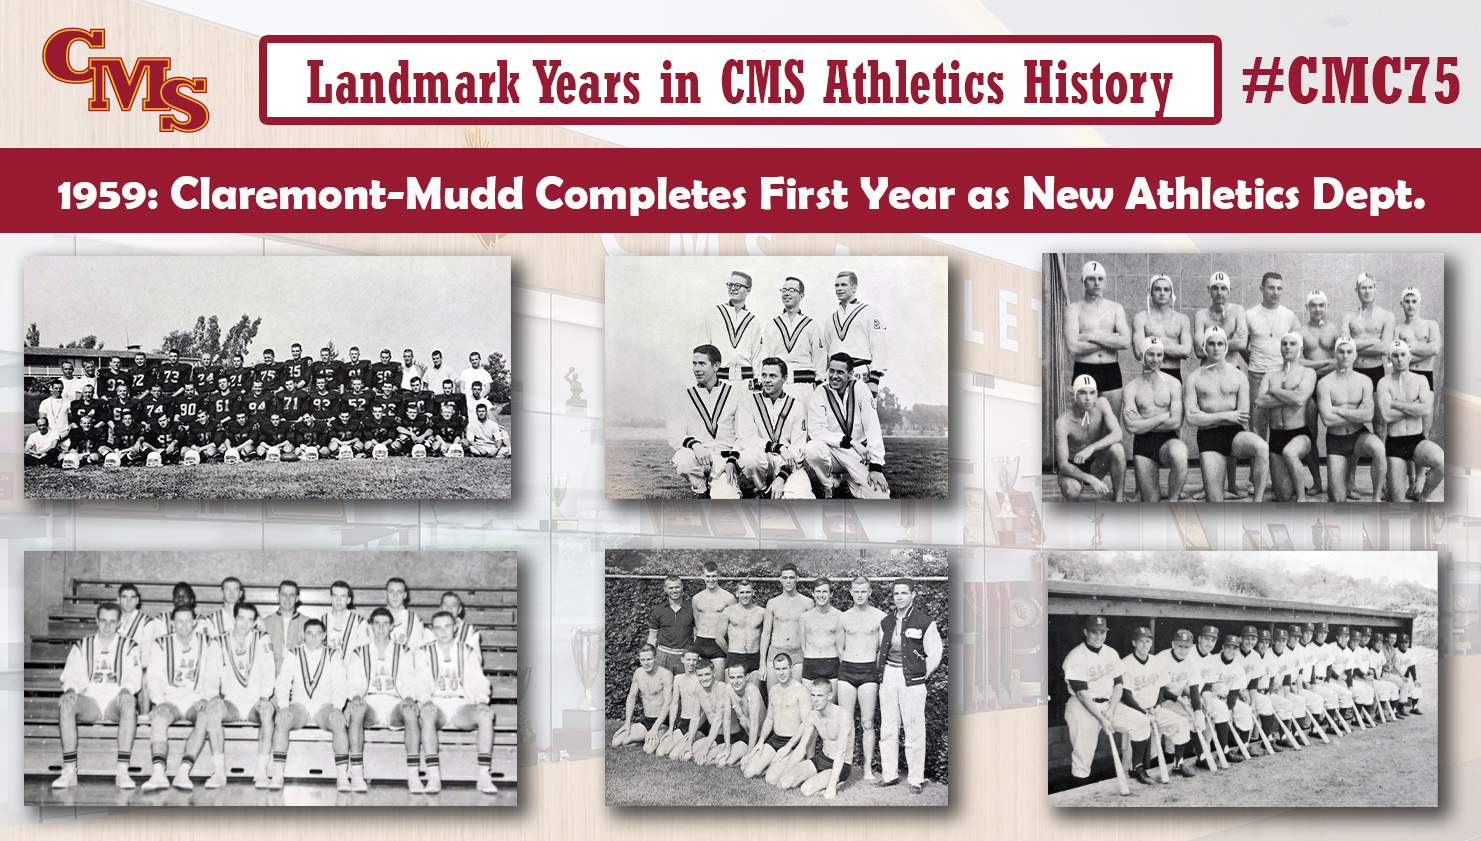 Team shots from six teams from Claremont-Mudd's debut season (top row: football, cross country, water polo, bottom row: basketball, swimming and diving, baseball). Words over the photo read: Landmark Years in CMS Athletics History: 1959: Claremont-Mudd Completes First Year in New Athletics Department